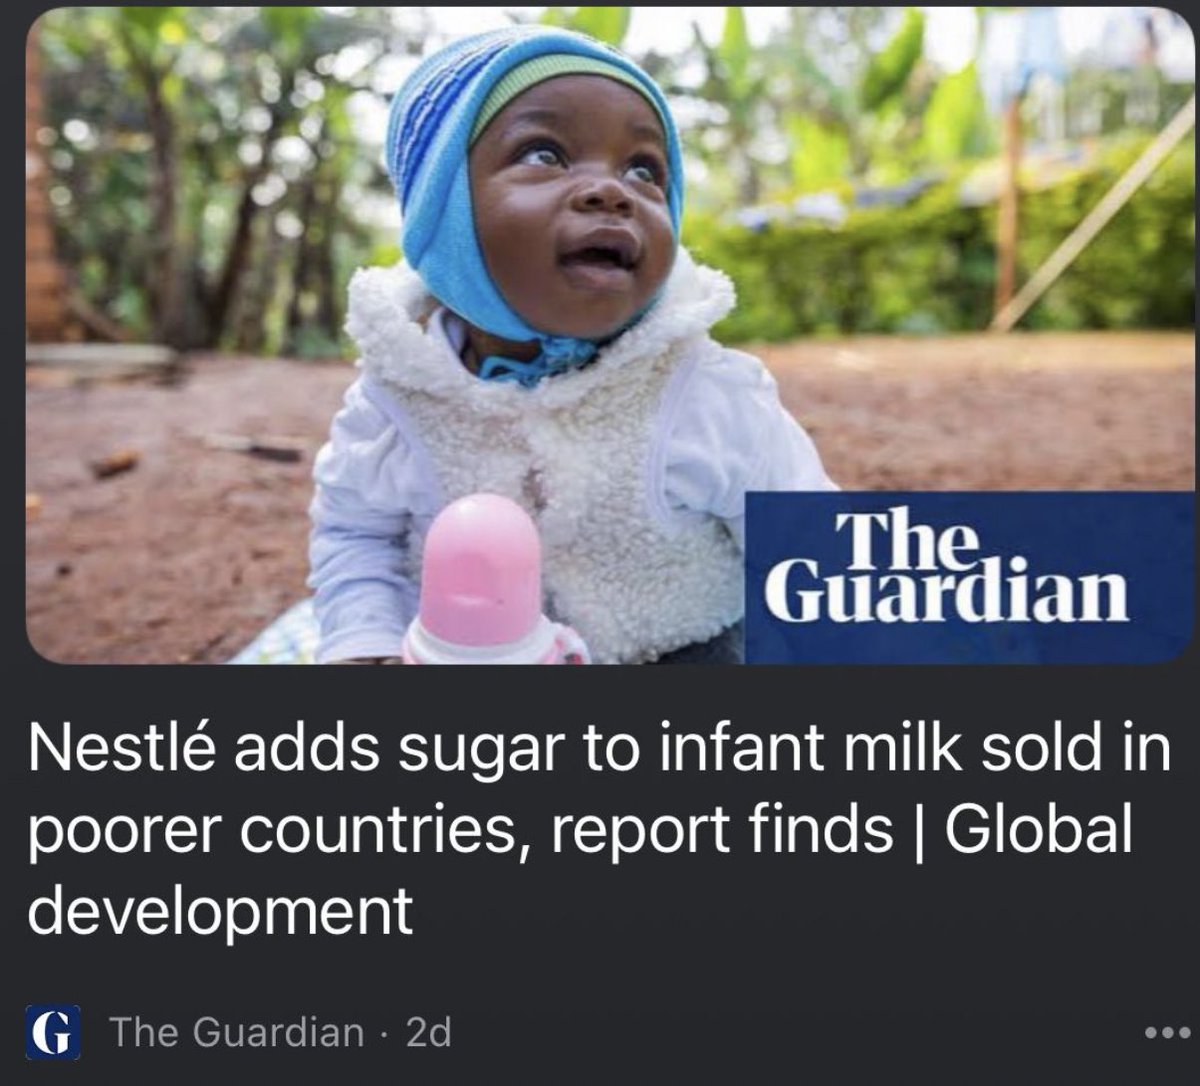 Isn’t it interesting that every time they mention “poor” they have a black in sight? That aside, I have never trusted Nestle.